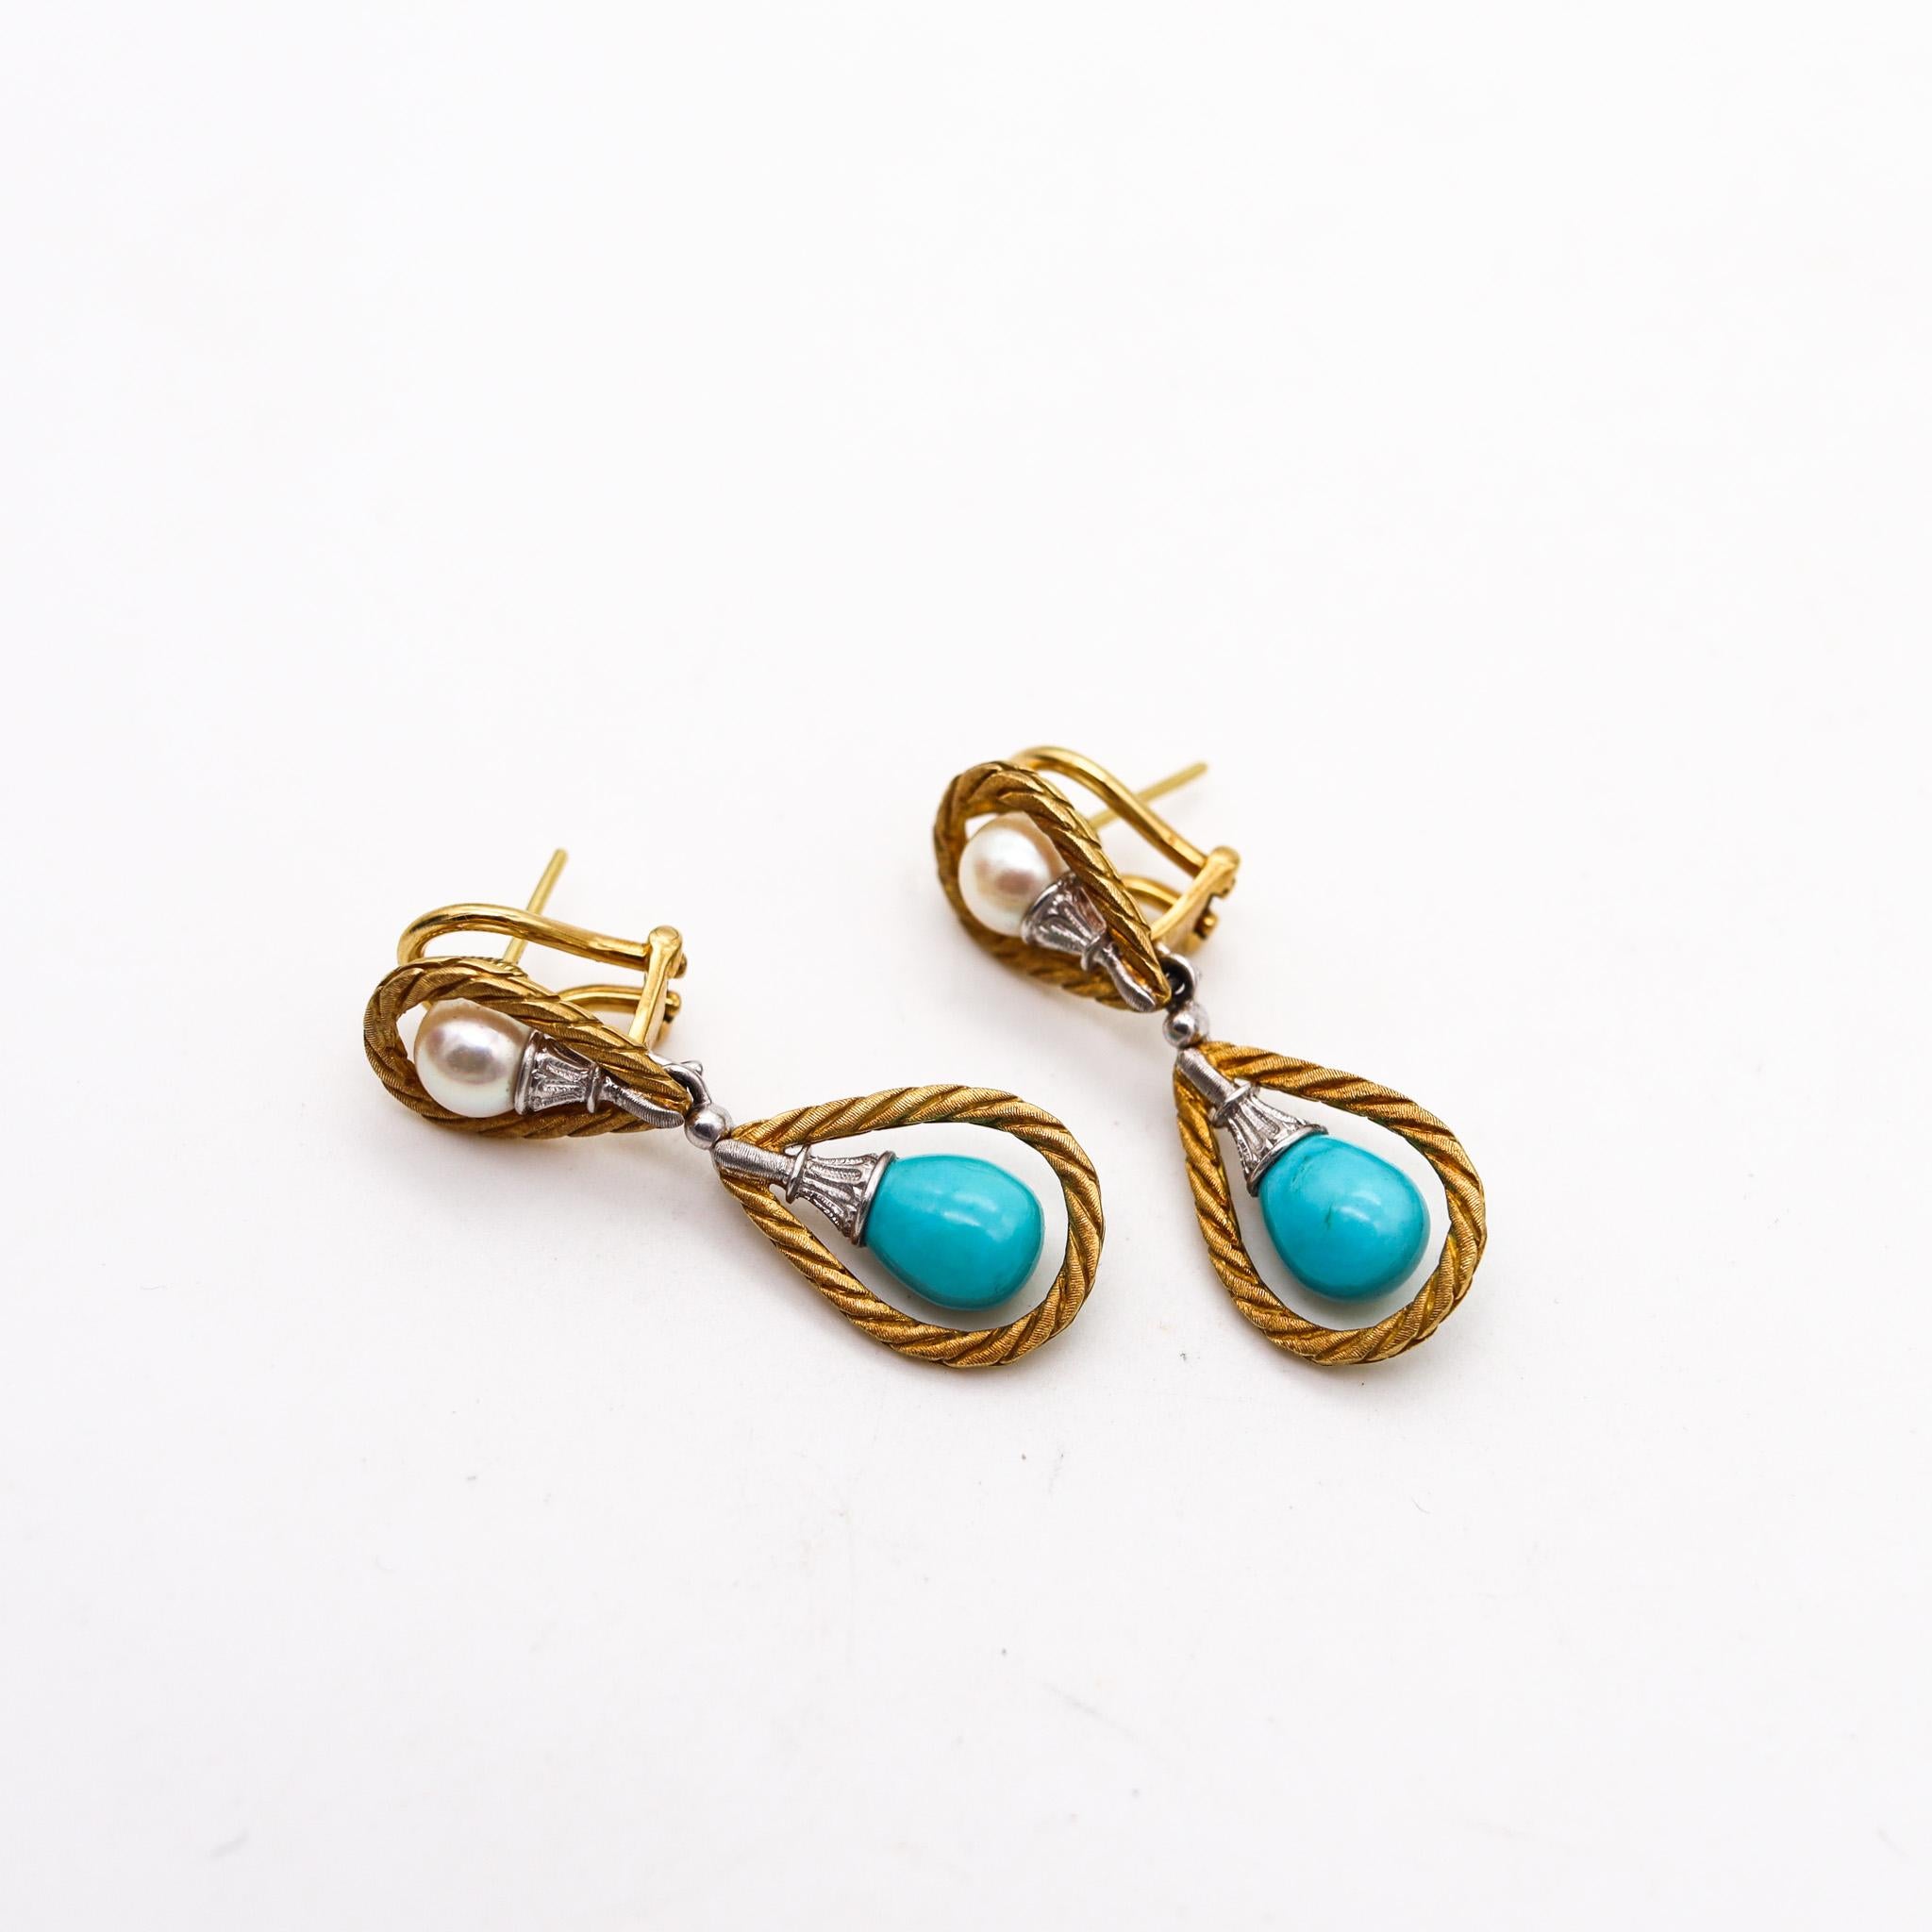 Baroque Revival Mario Buccellati 1970 Dangle Earrings In 18Kt Gold With Turquoises and Pearls For Sale